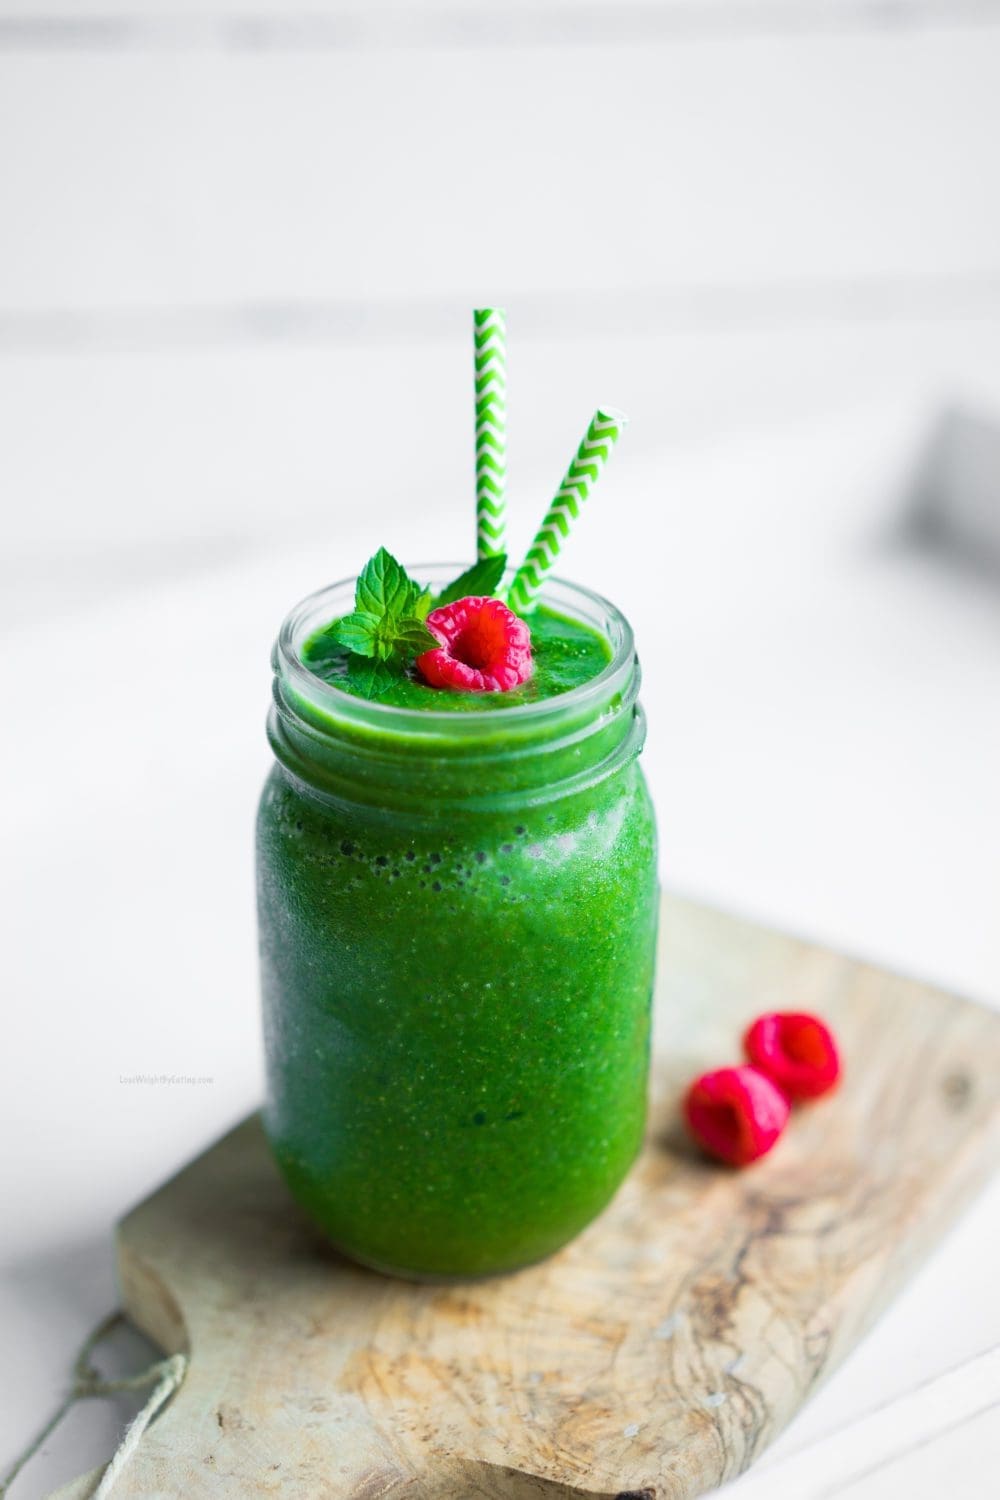 10 Health Benefits of Green Smoothies